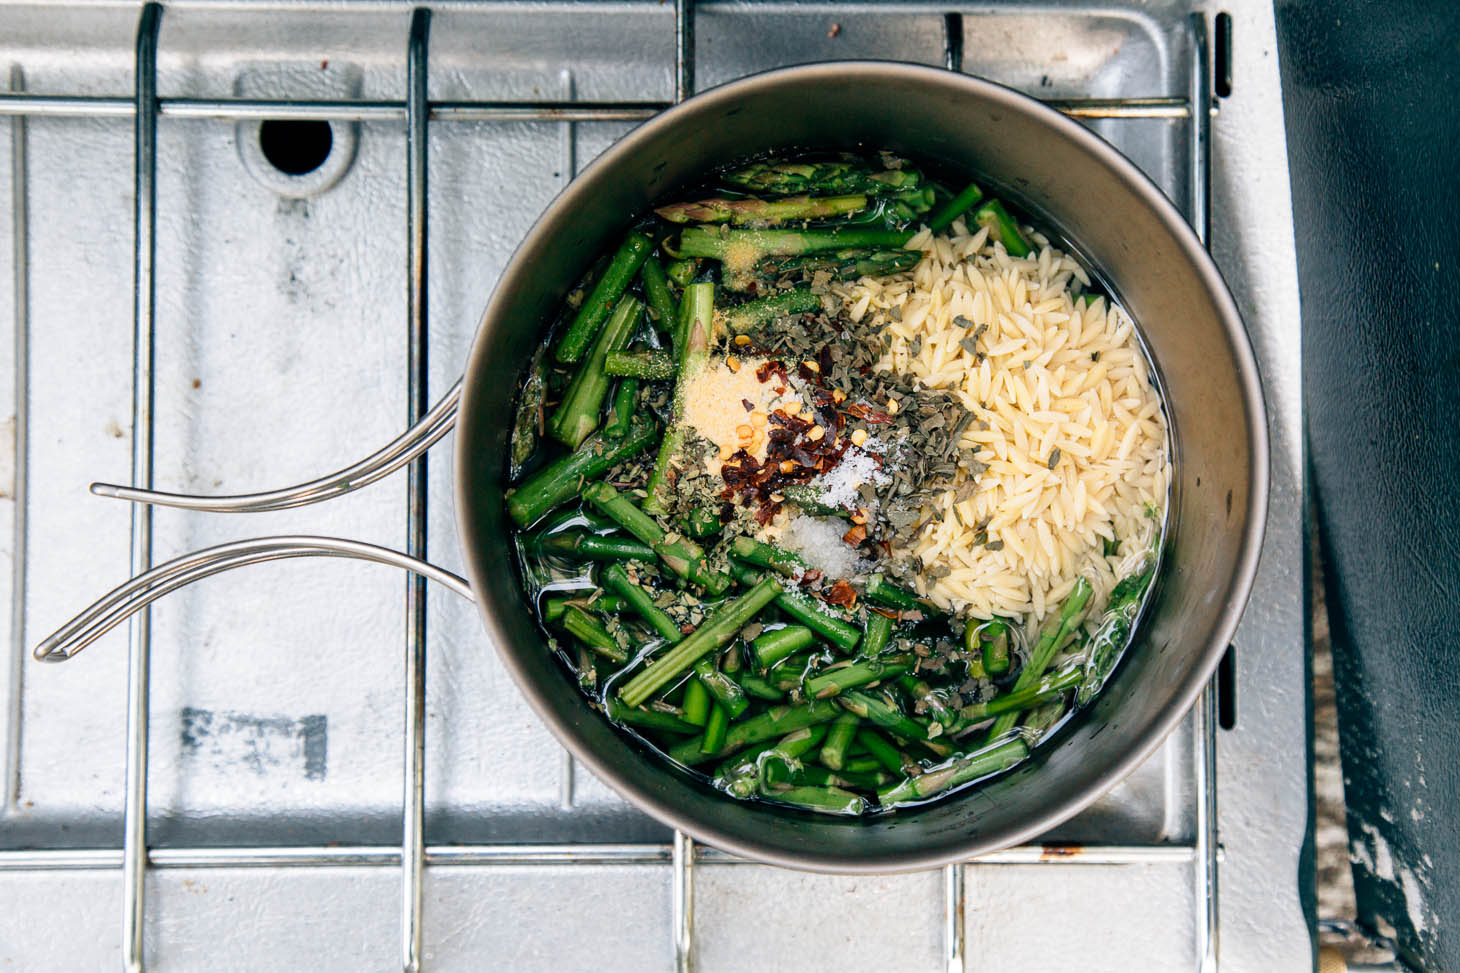 Ingredients for asparagus orzo in a cooking pot on a camping stove